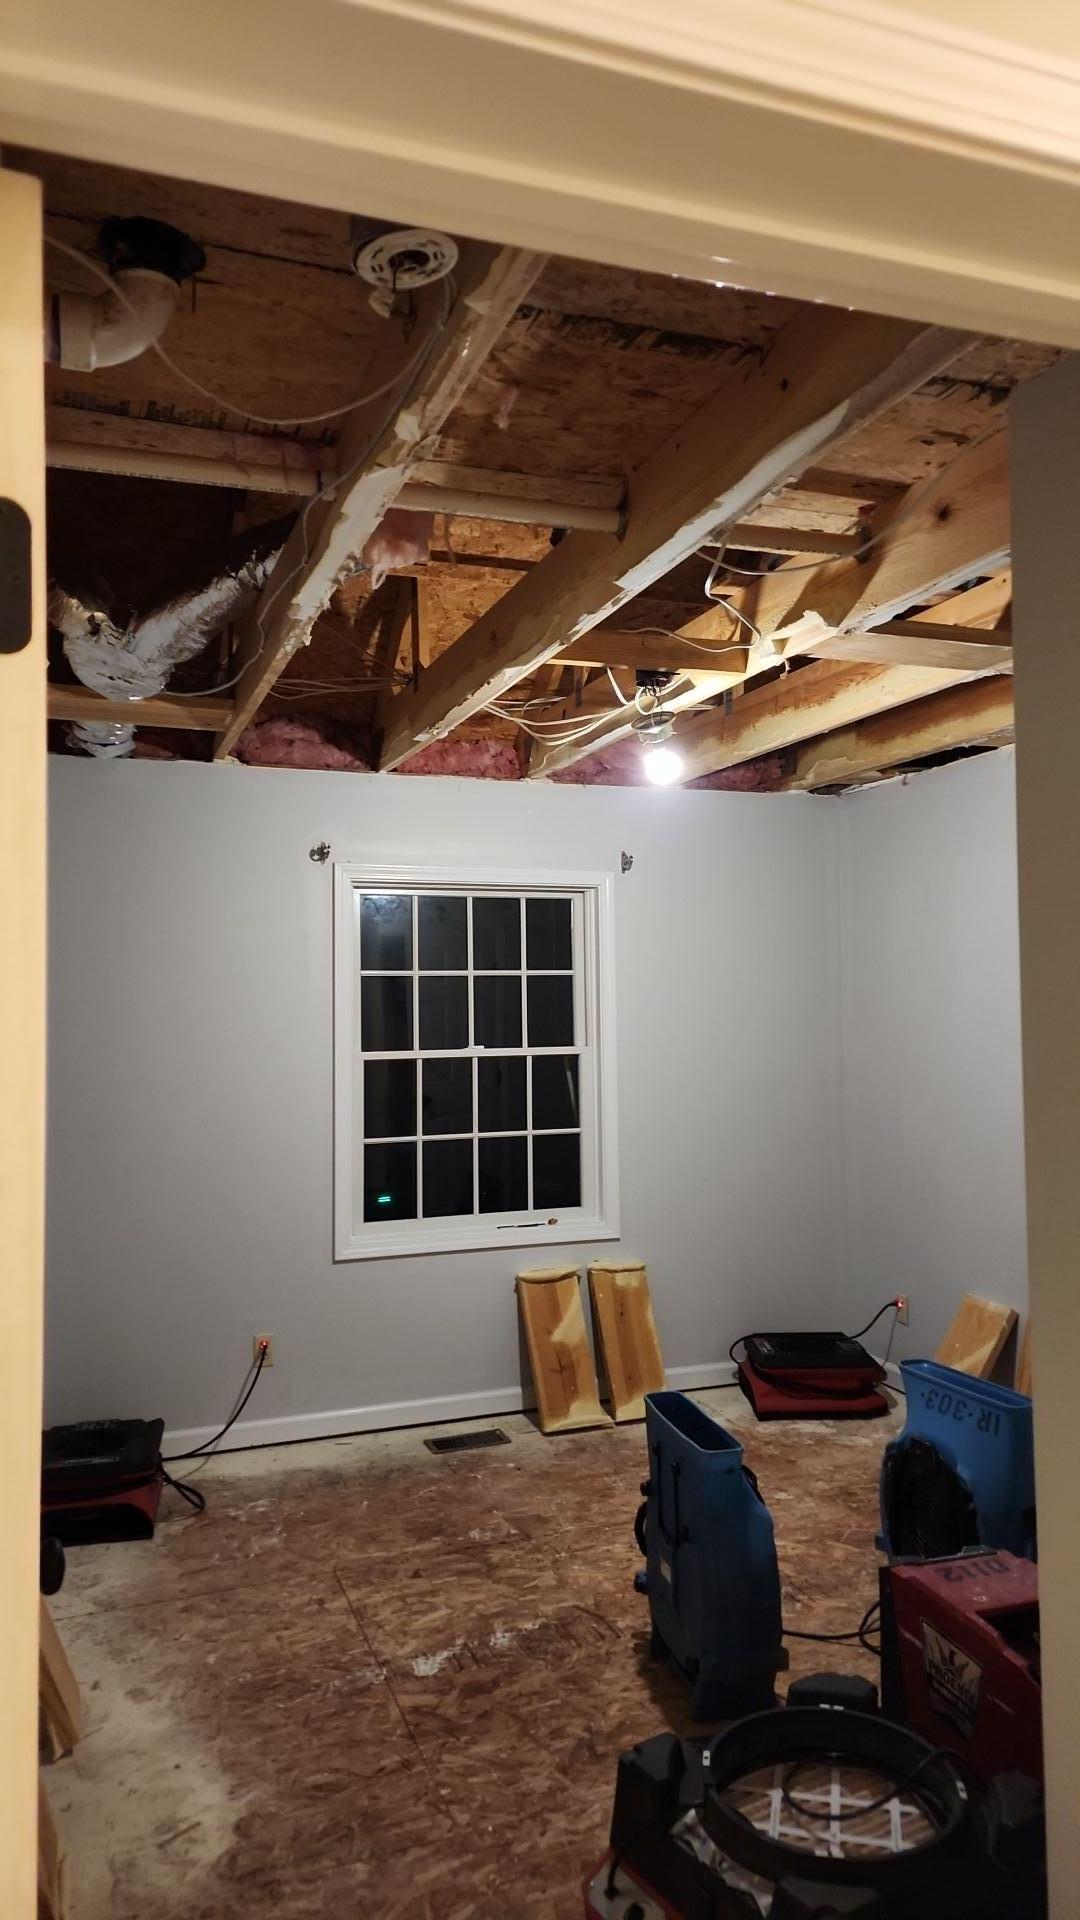 Removed ceiling to make repairs